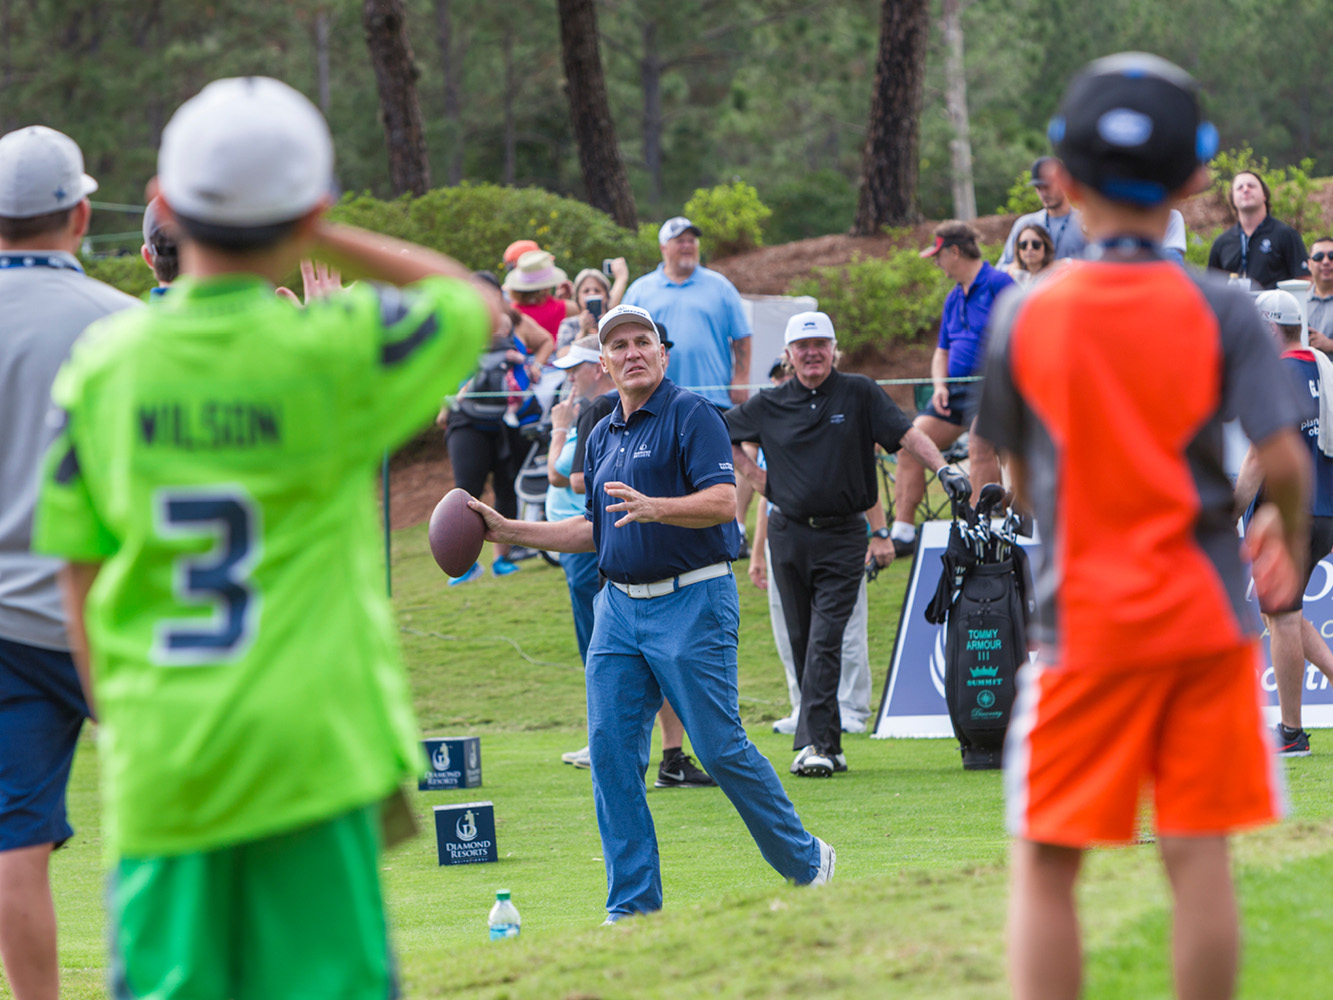 Former NFL quarter and Super Bowl MVP Mark Rypien will be among the celebrities competing in the Diamond Resorts Tournament of Champions.